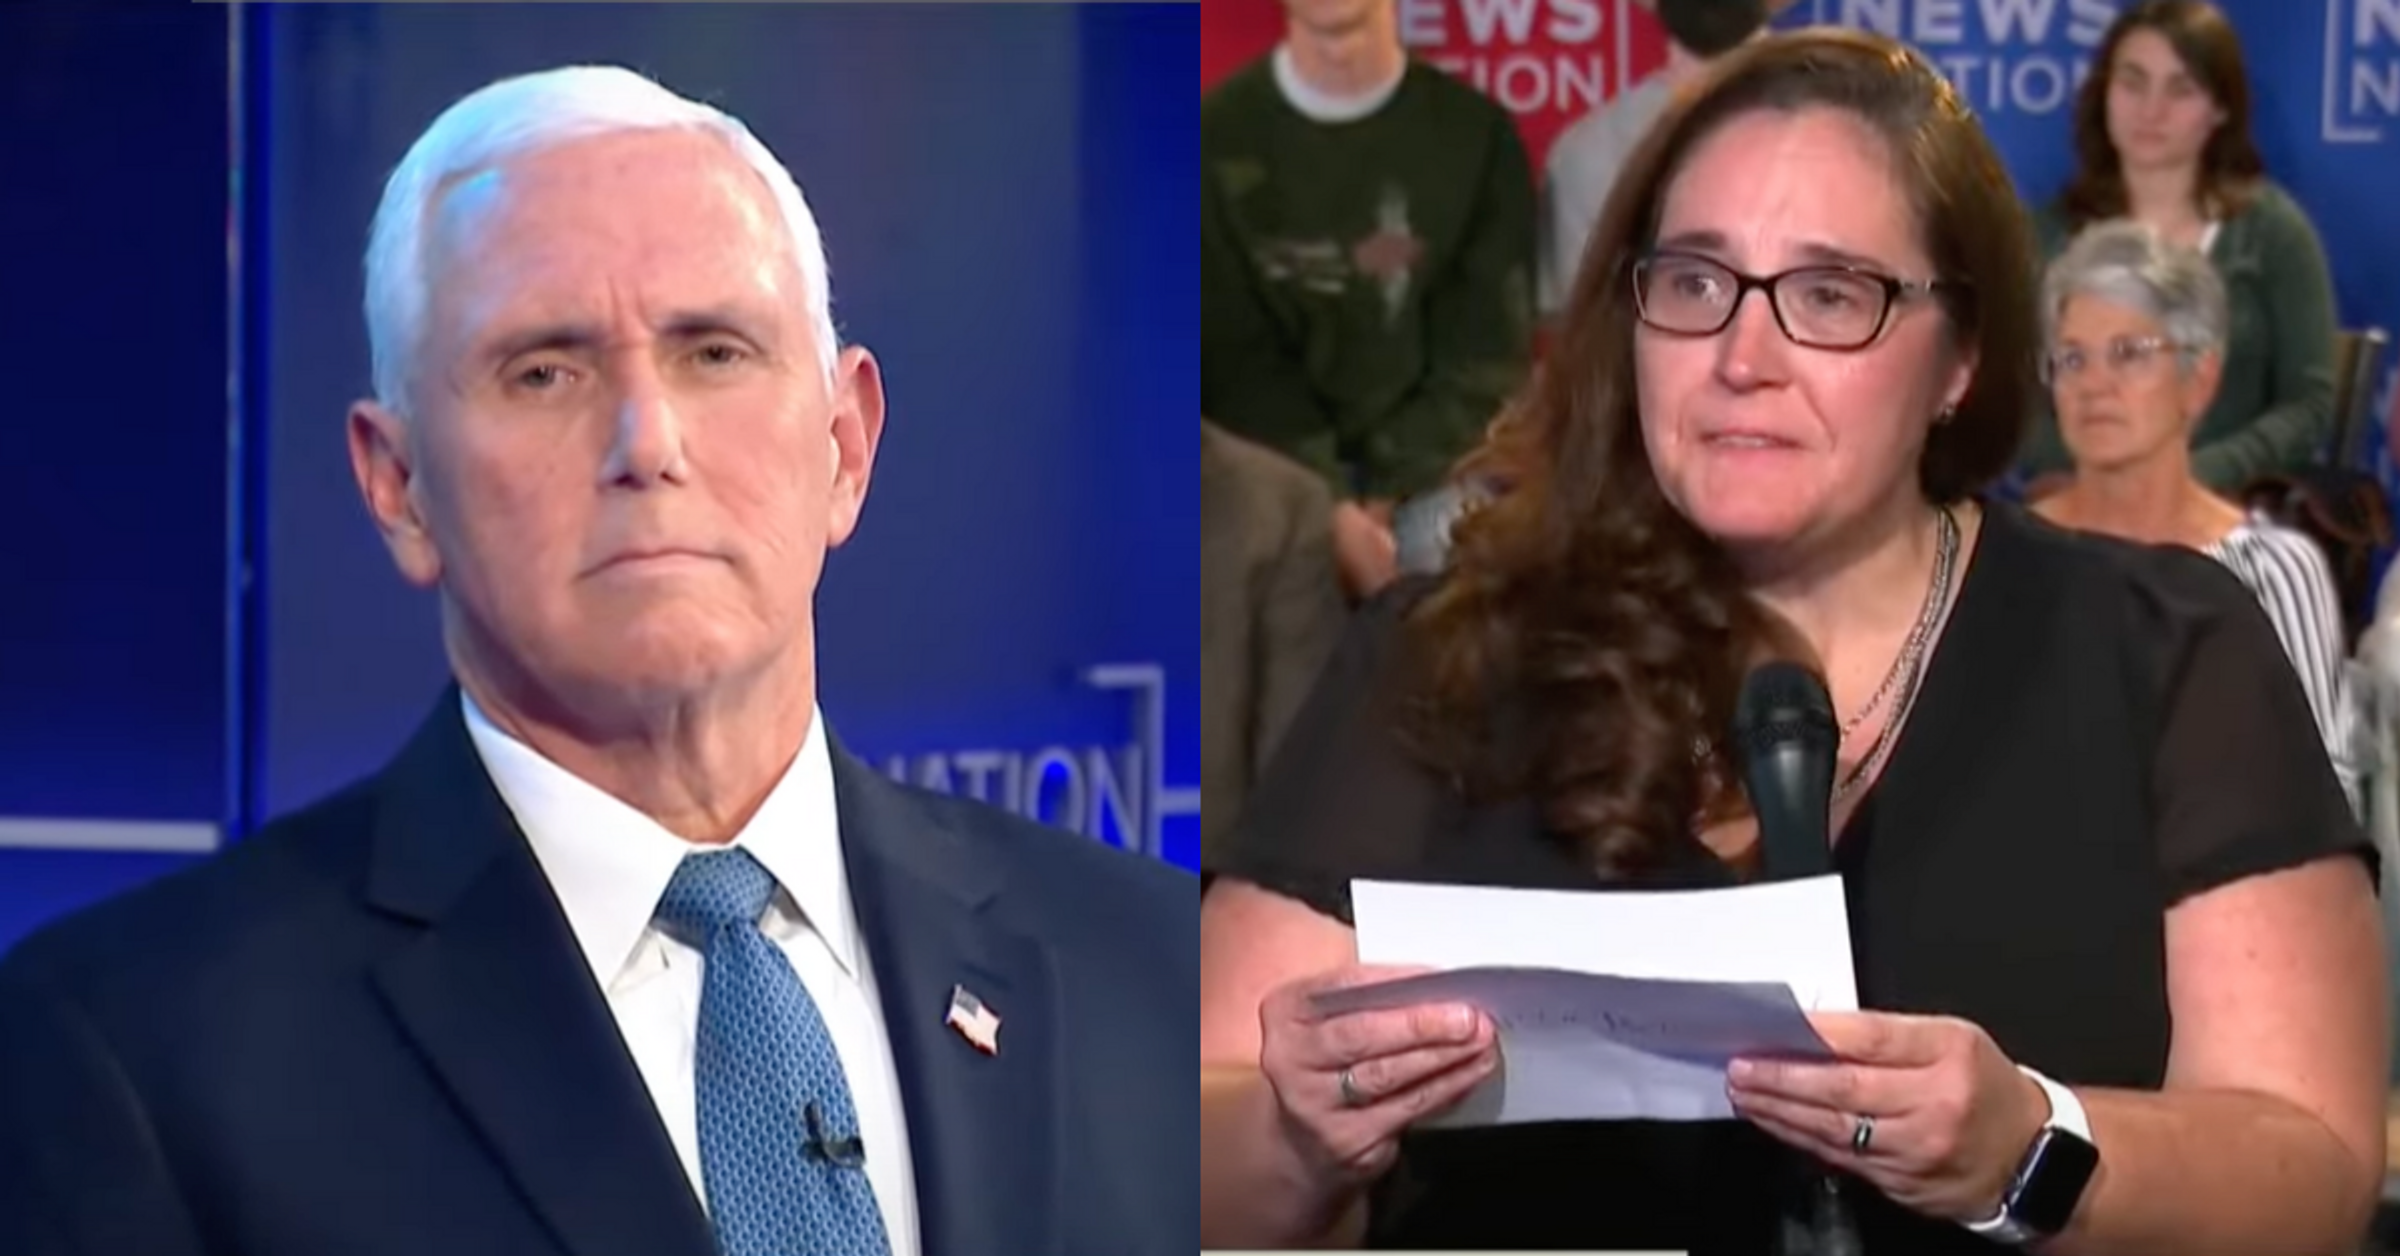 Iowa Professor Rips Pence’s ‘Appalling’ Stance Against Trans Youth In Emotional Confrontation (comicsands.com)